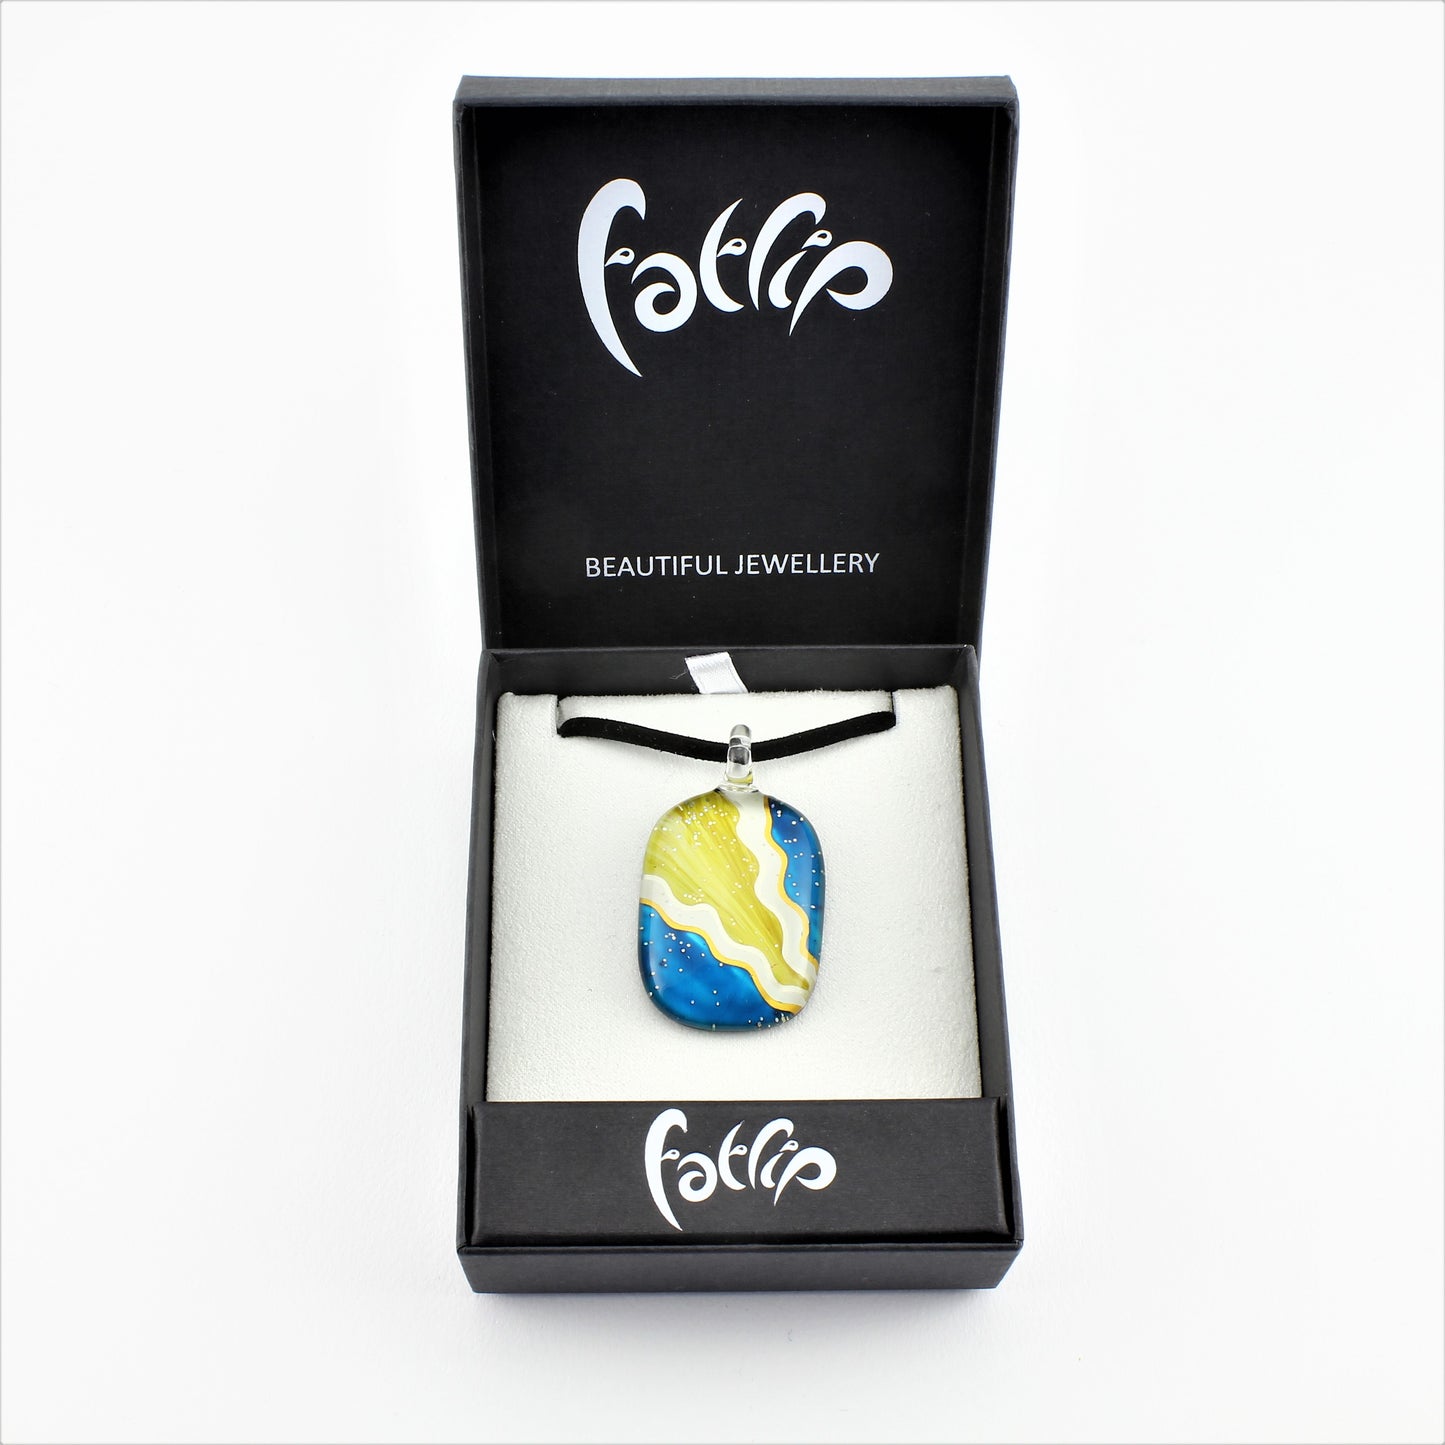 SWN581 Blue/Yellow Oval Glass Pendant Necklace